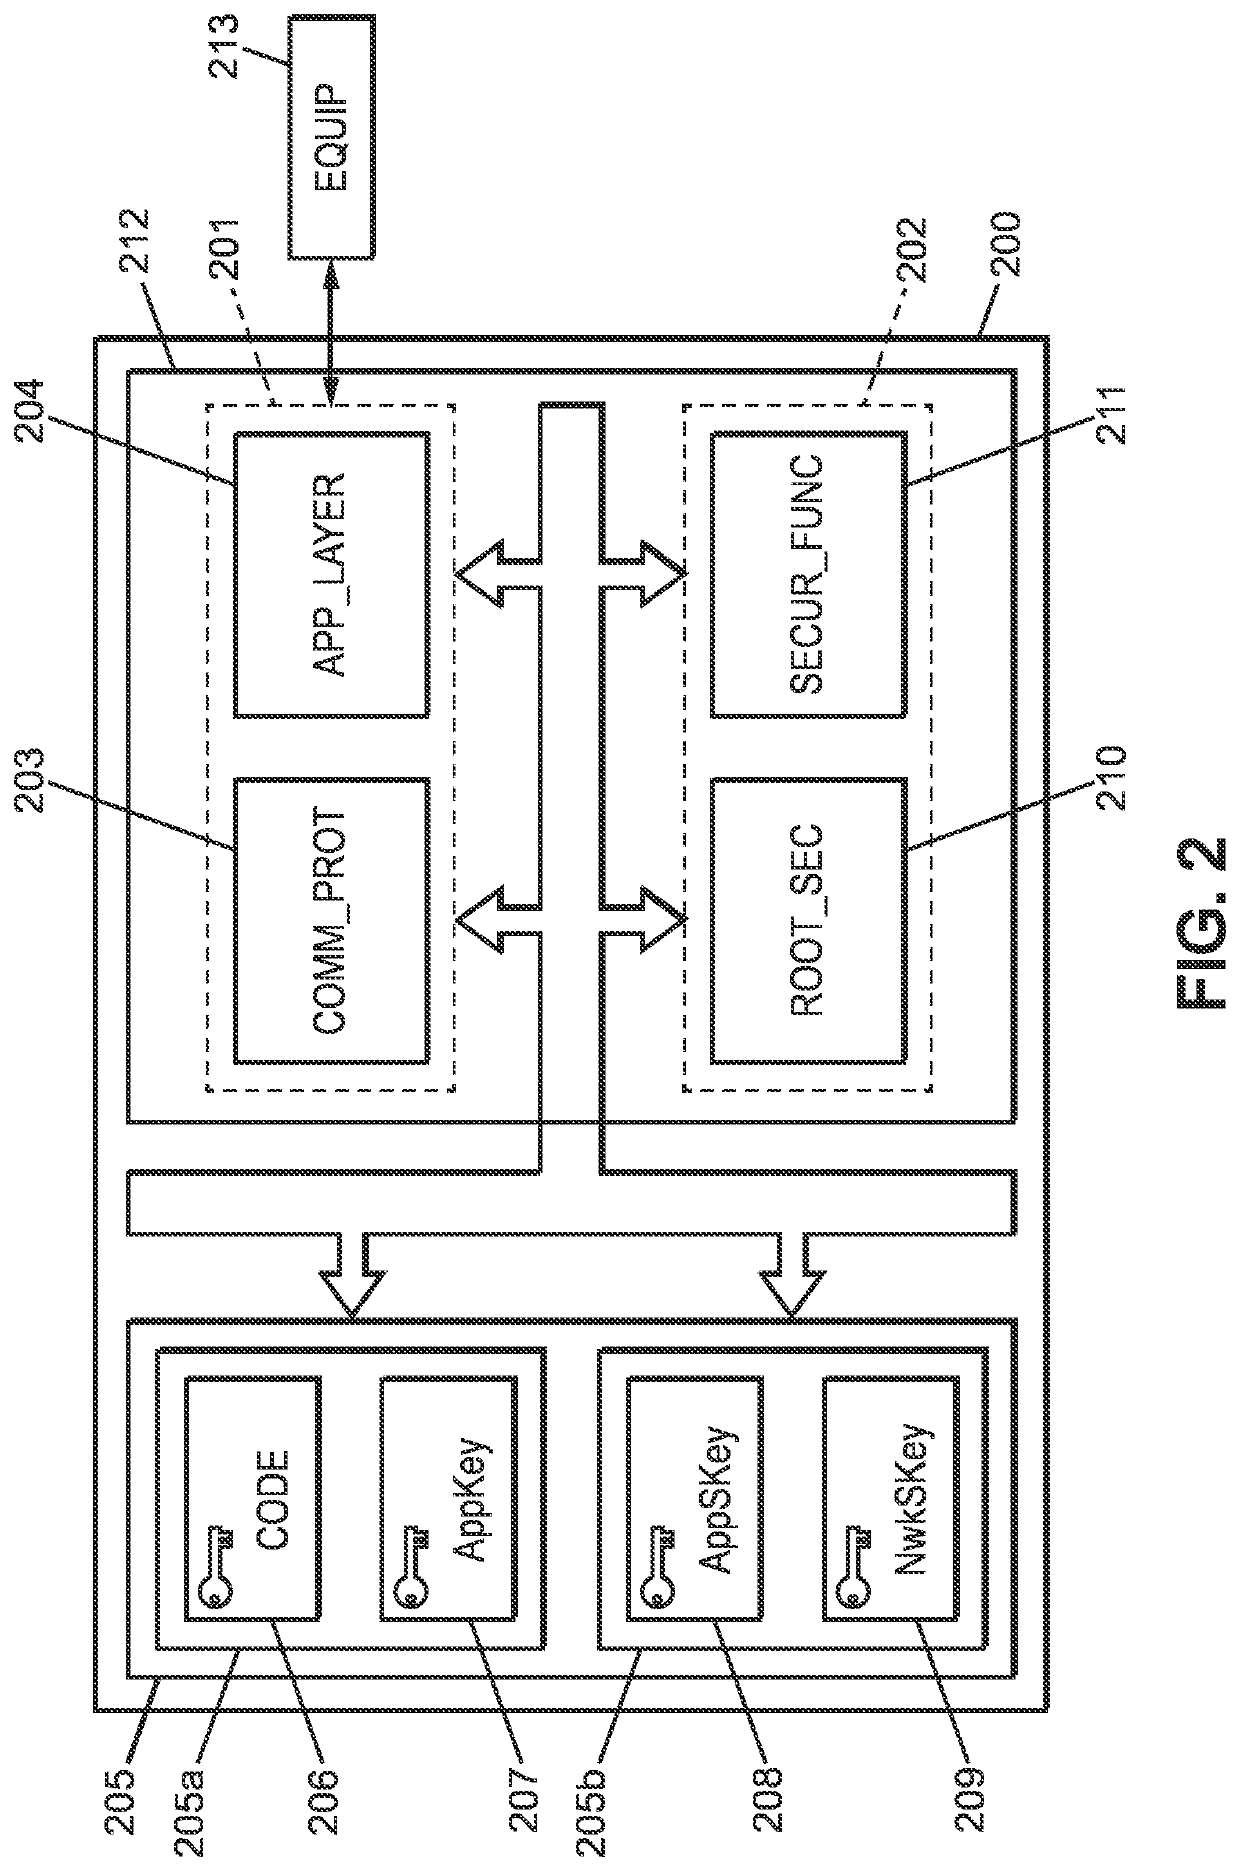 Communication interface for a low power wide area network, wireless device and server using such communication interface